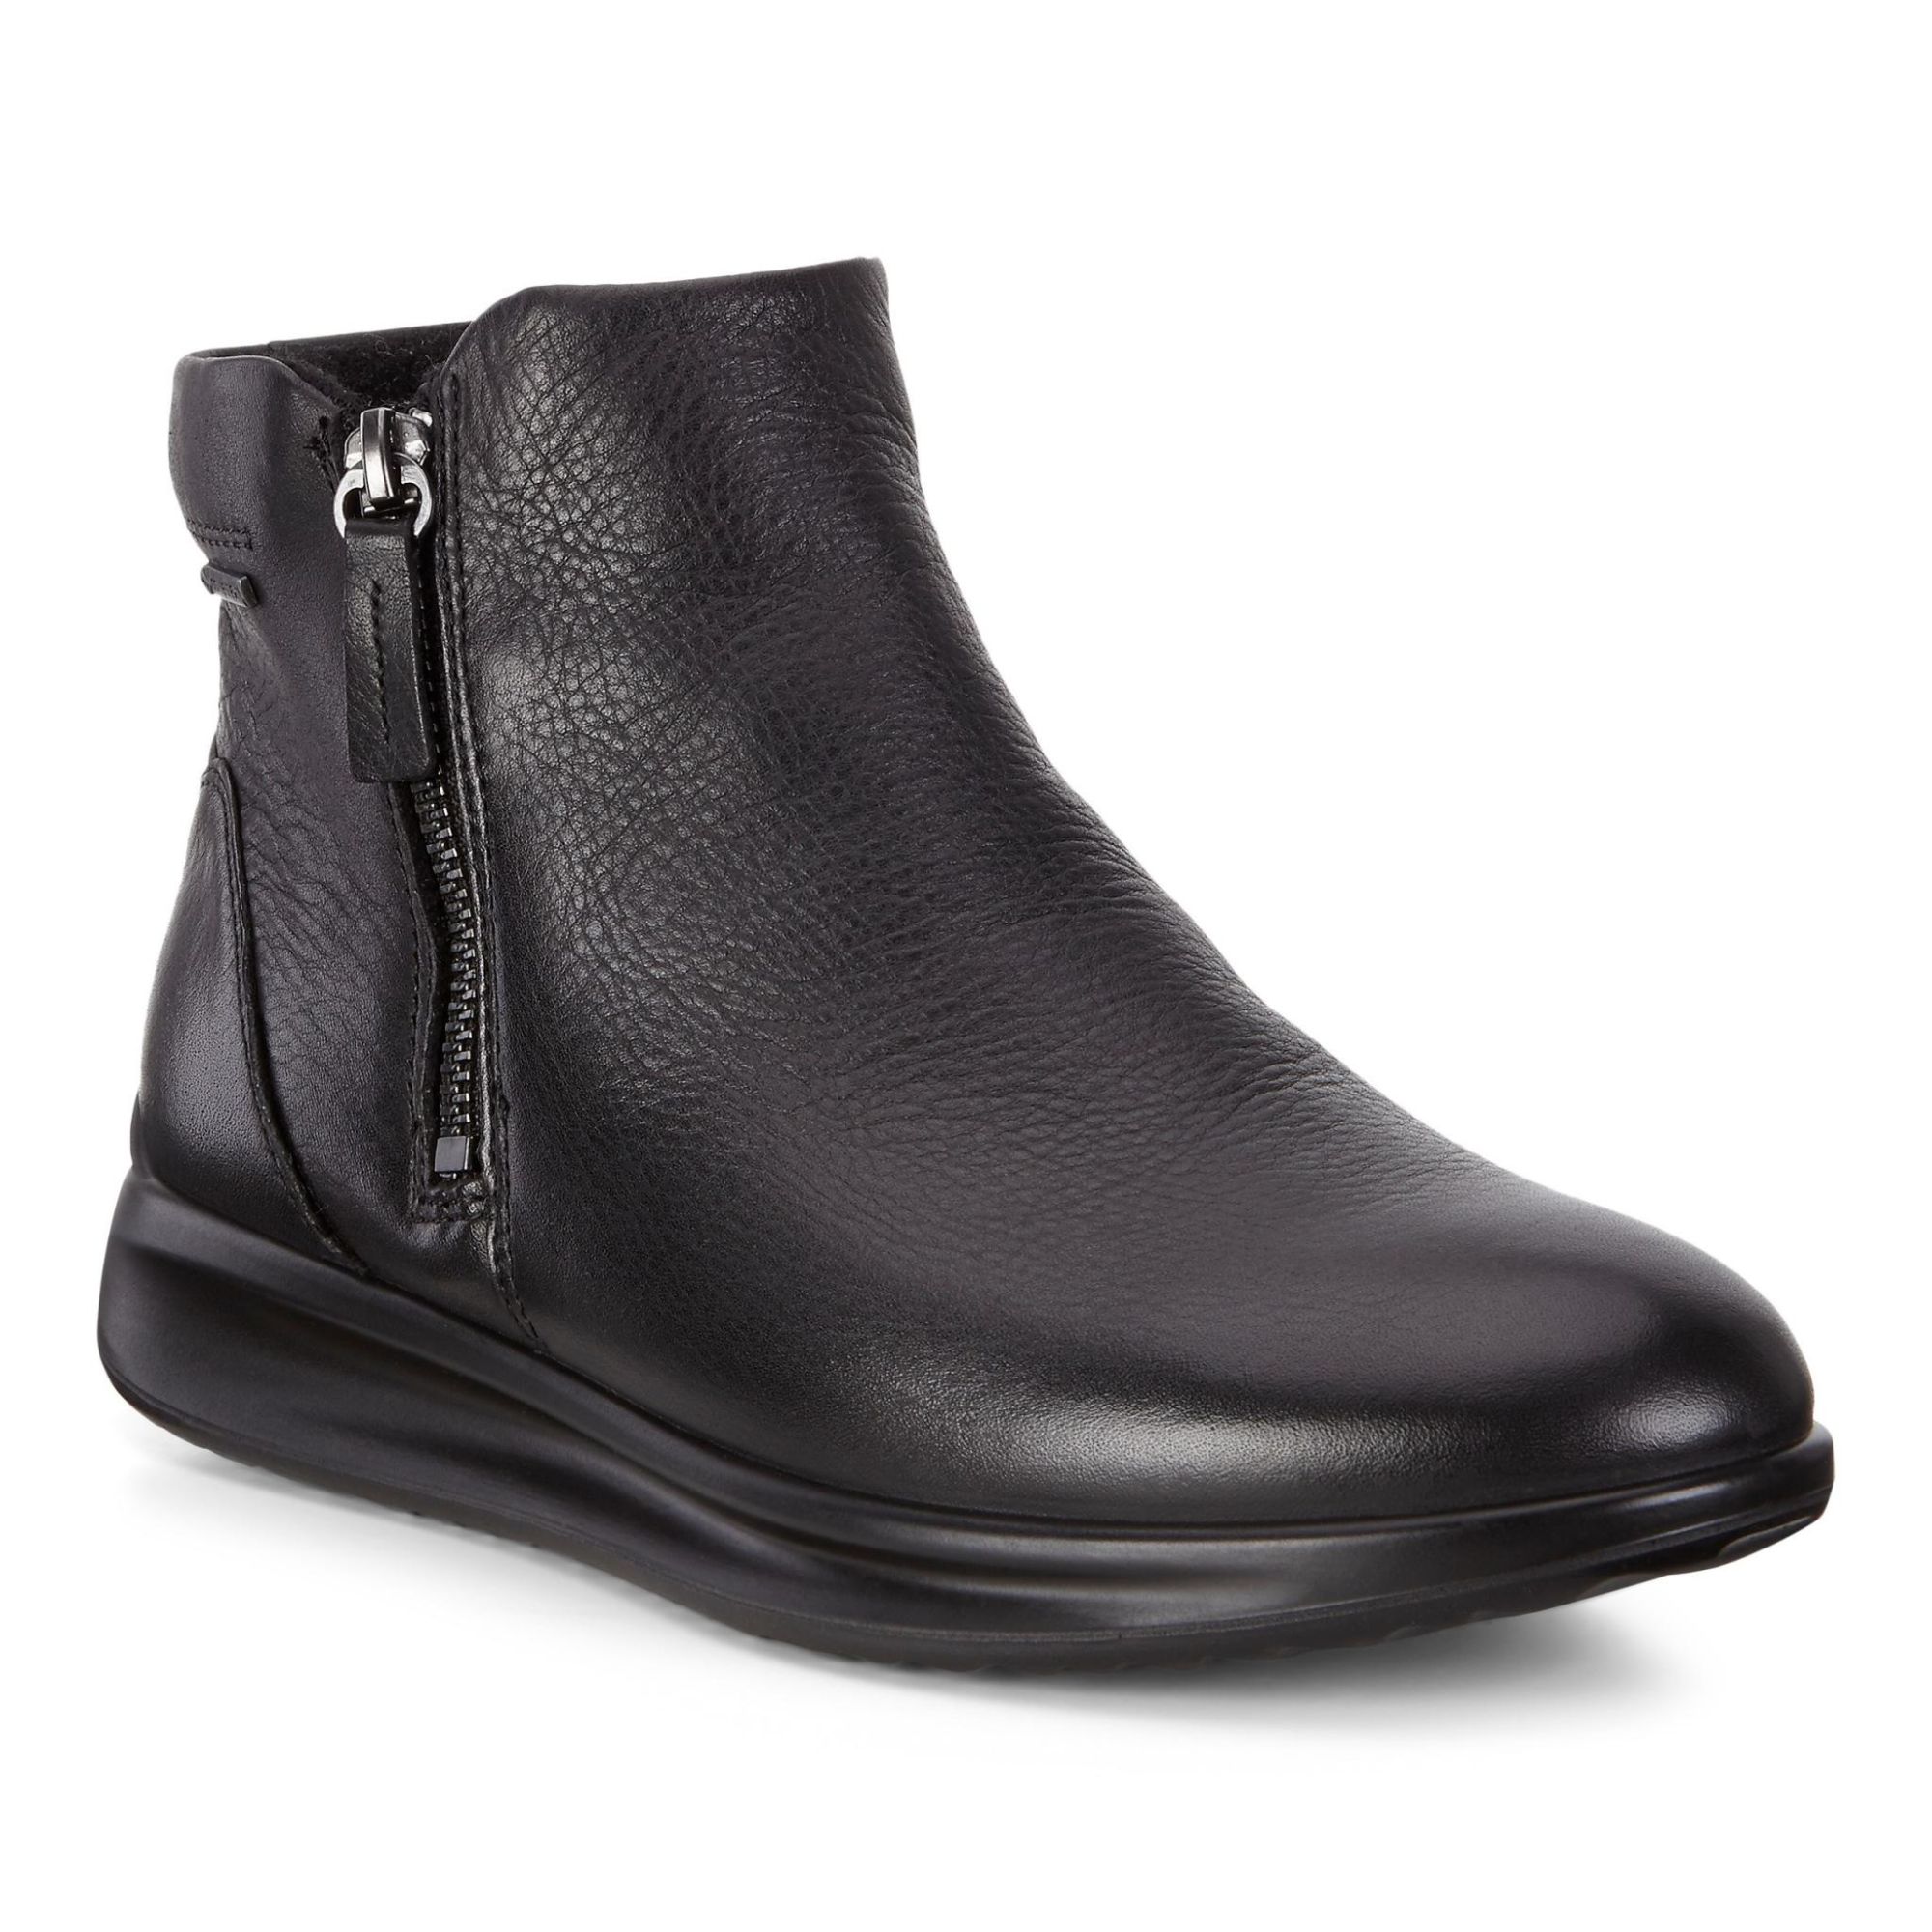 Ecco AQUET Ankle Boot 37 - Products - Veryk Mall - Veryk Mall